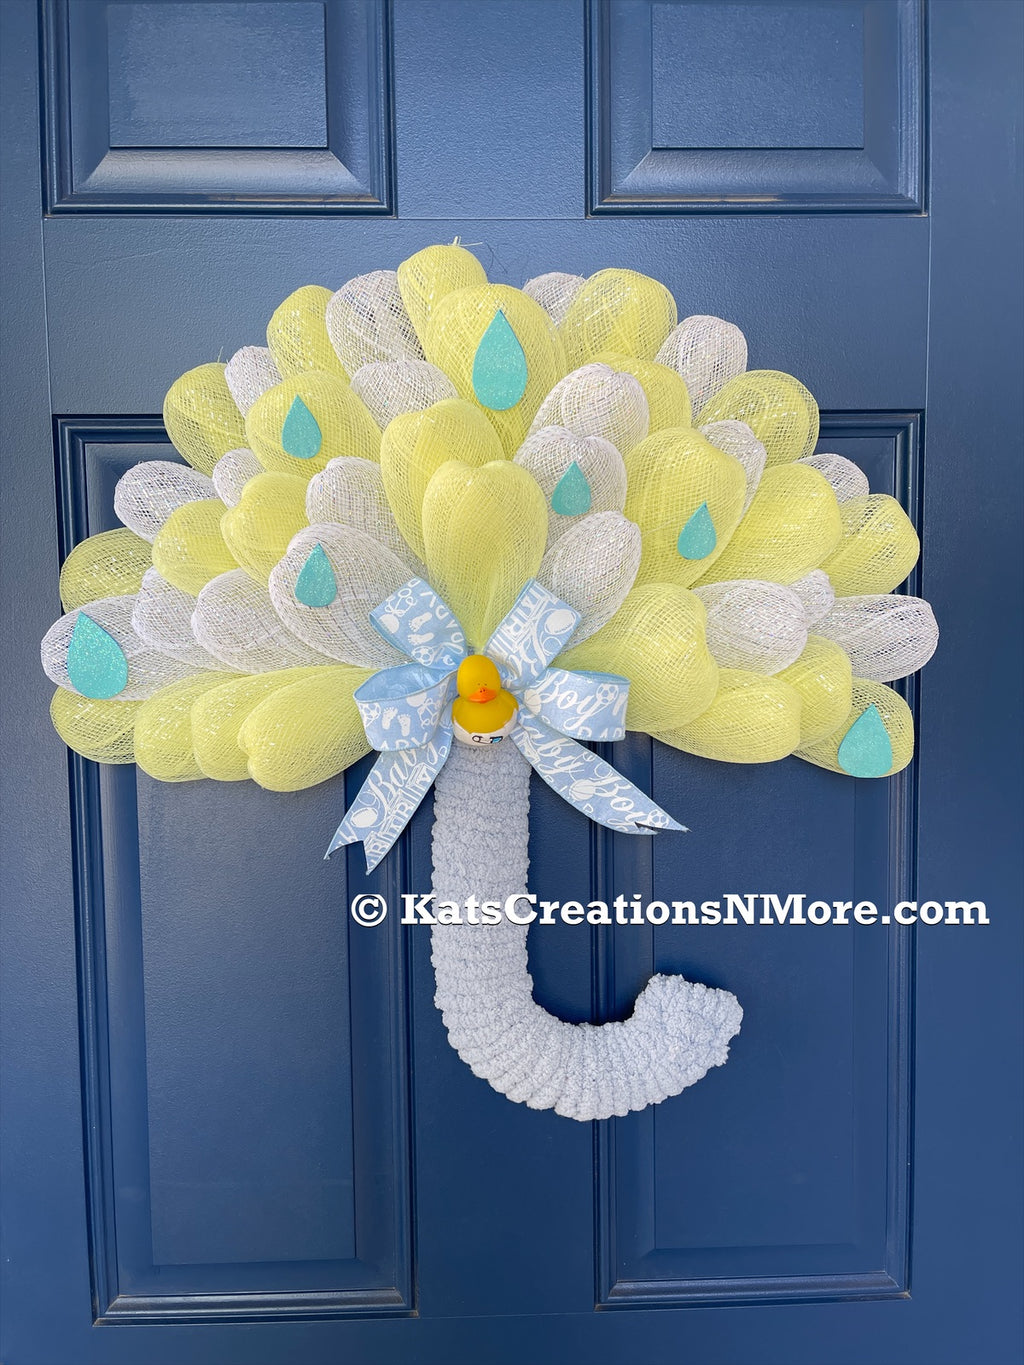 Blue, White and Yellow Deco Mesh Umbrella Wreath for Baby Boy Shower